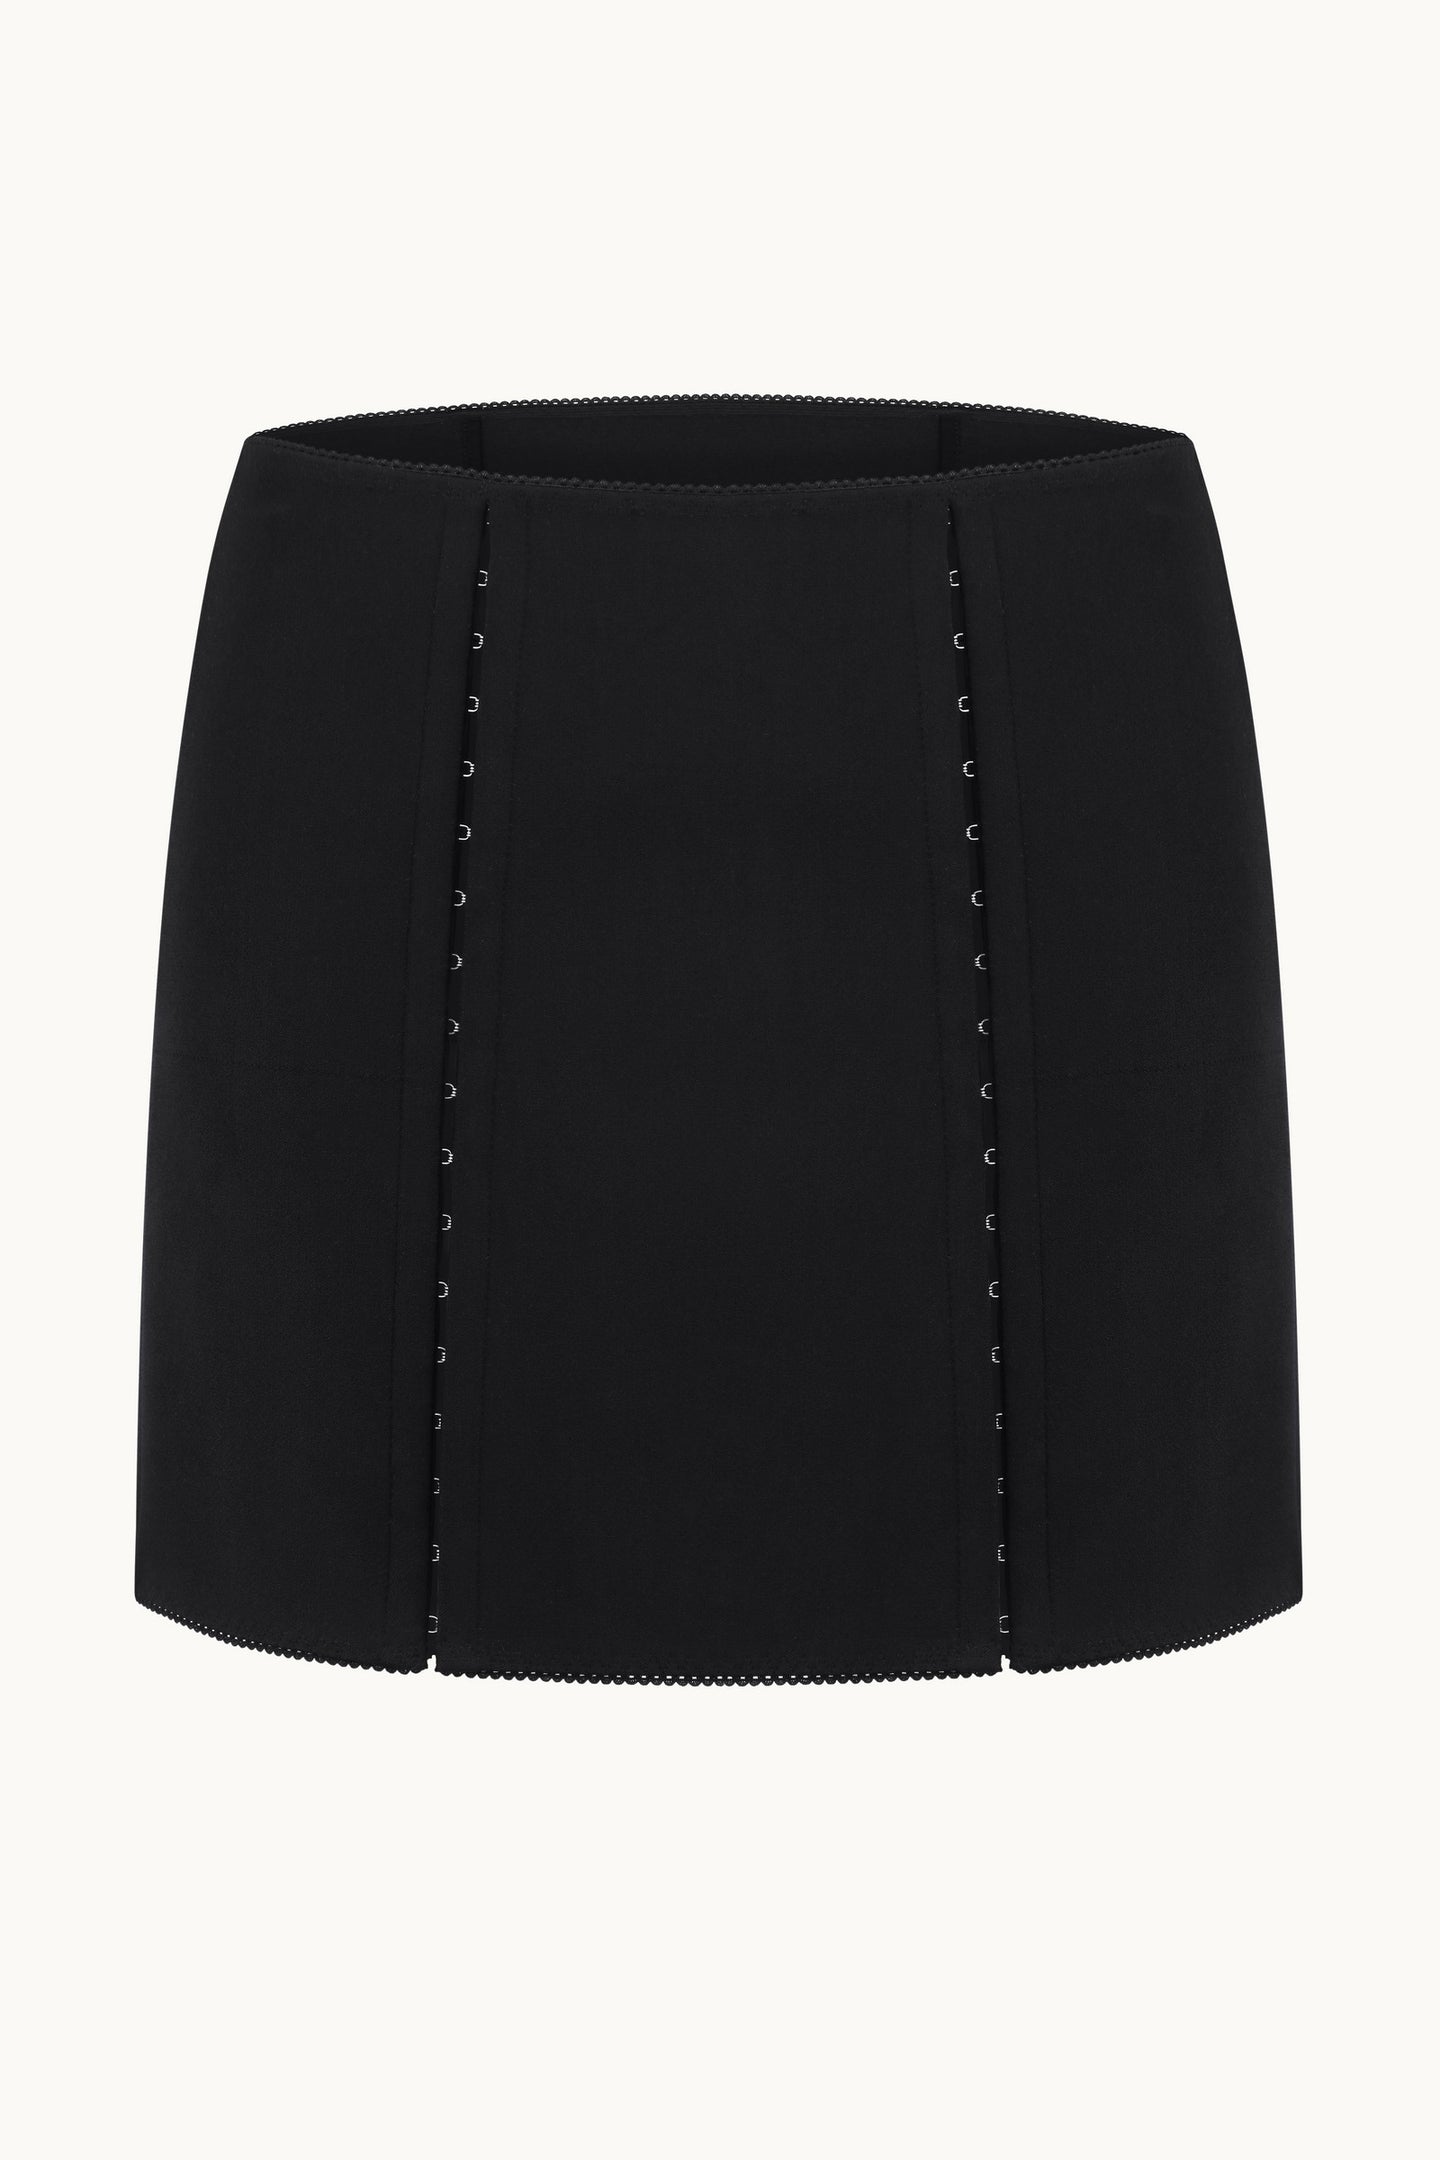 Barbe black skirt front view